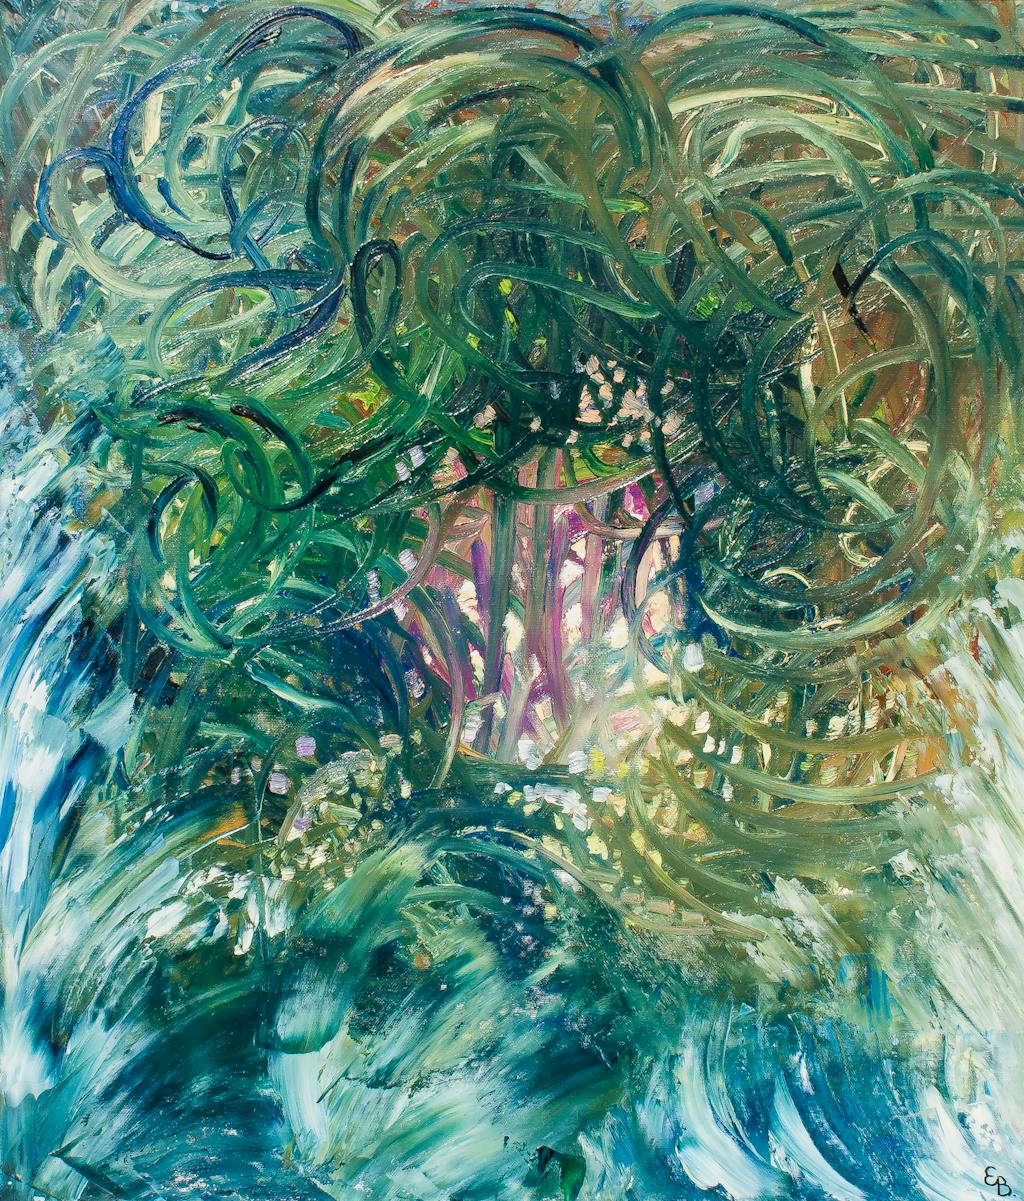 Painting "Sea monster", painted by Elena Birkenwald in 1998